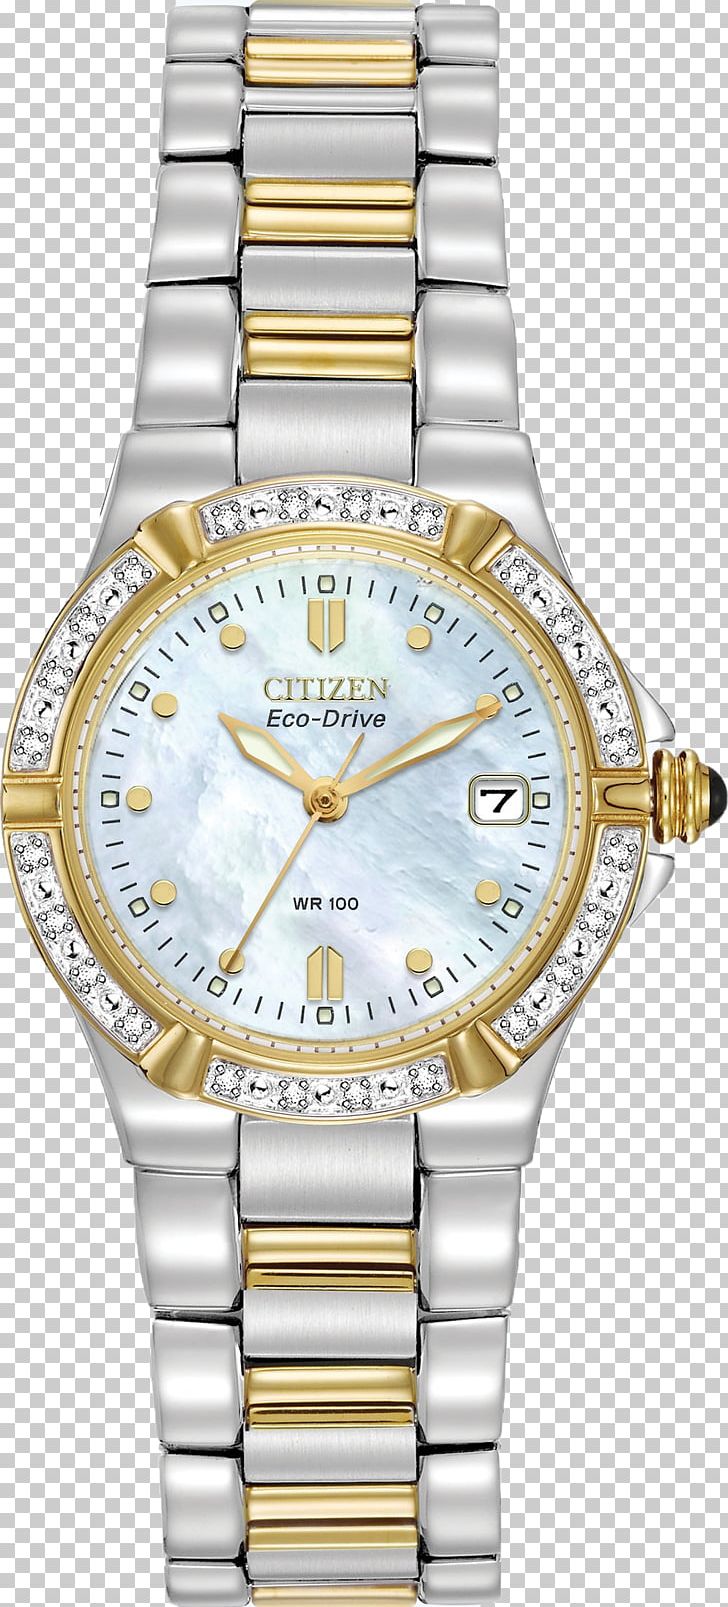 Eco-Drive Watch Citizen Holdings Jewellery Chronograph PNG, Clipart, Accessories, Analog Watch, Bracelet, Brand, Chronograph Free PNG Download